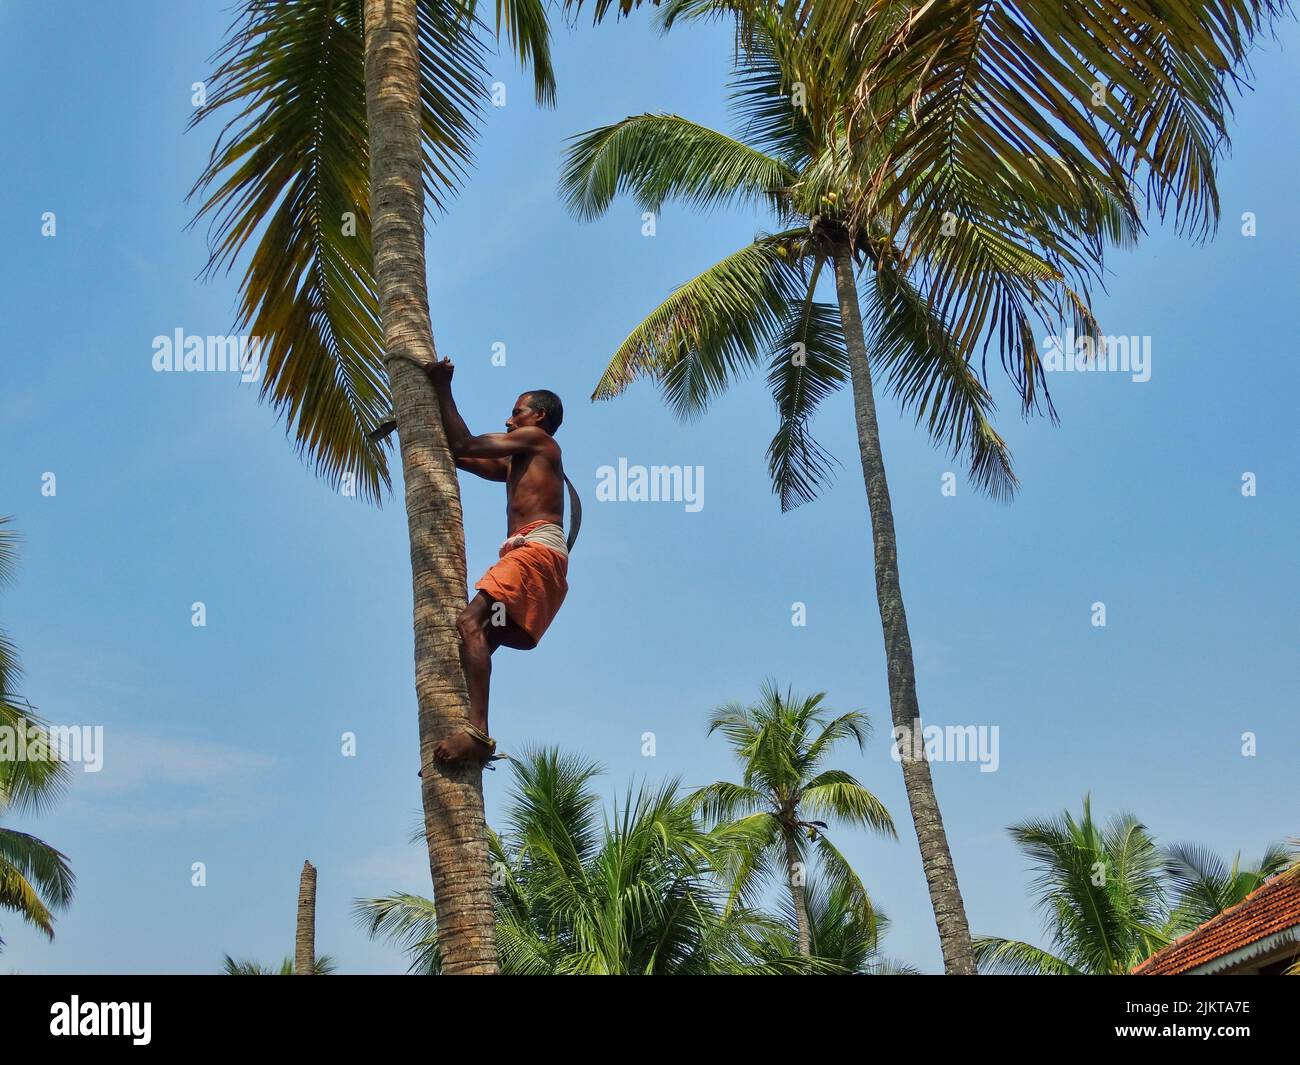 The photo shows an Indian man climbing up a coconut tree in the traditional way to pick coconuts. Stock Photo